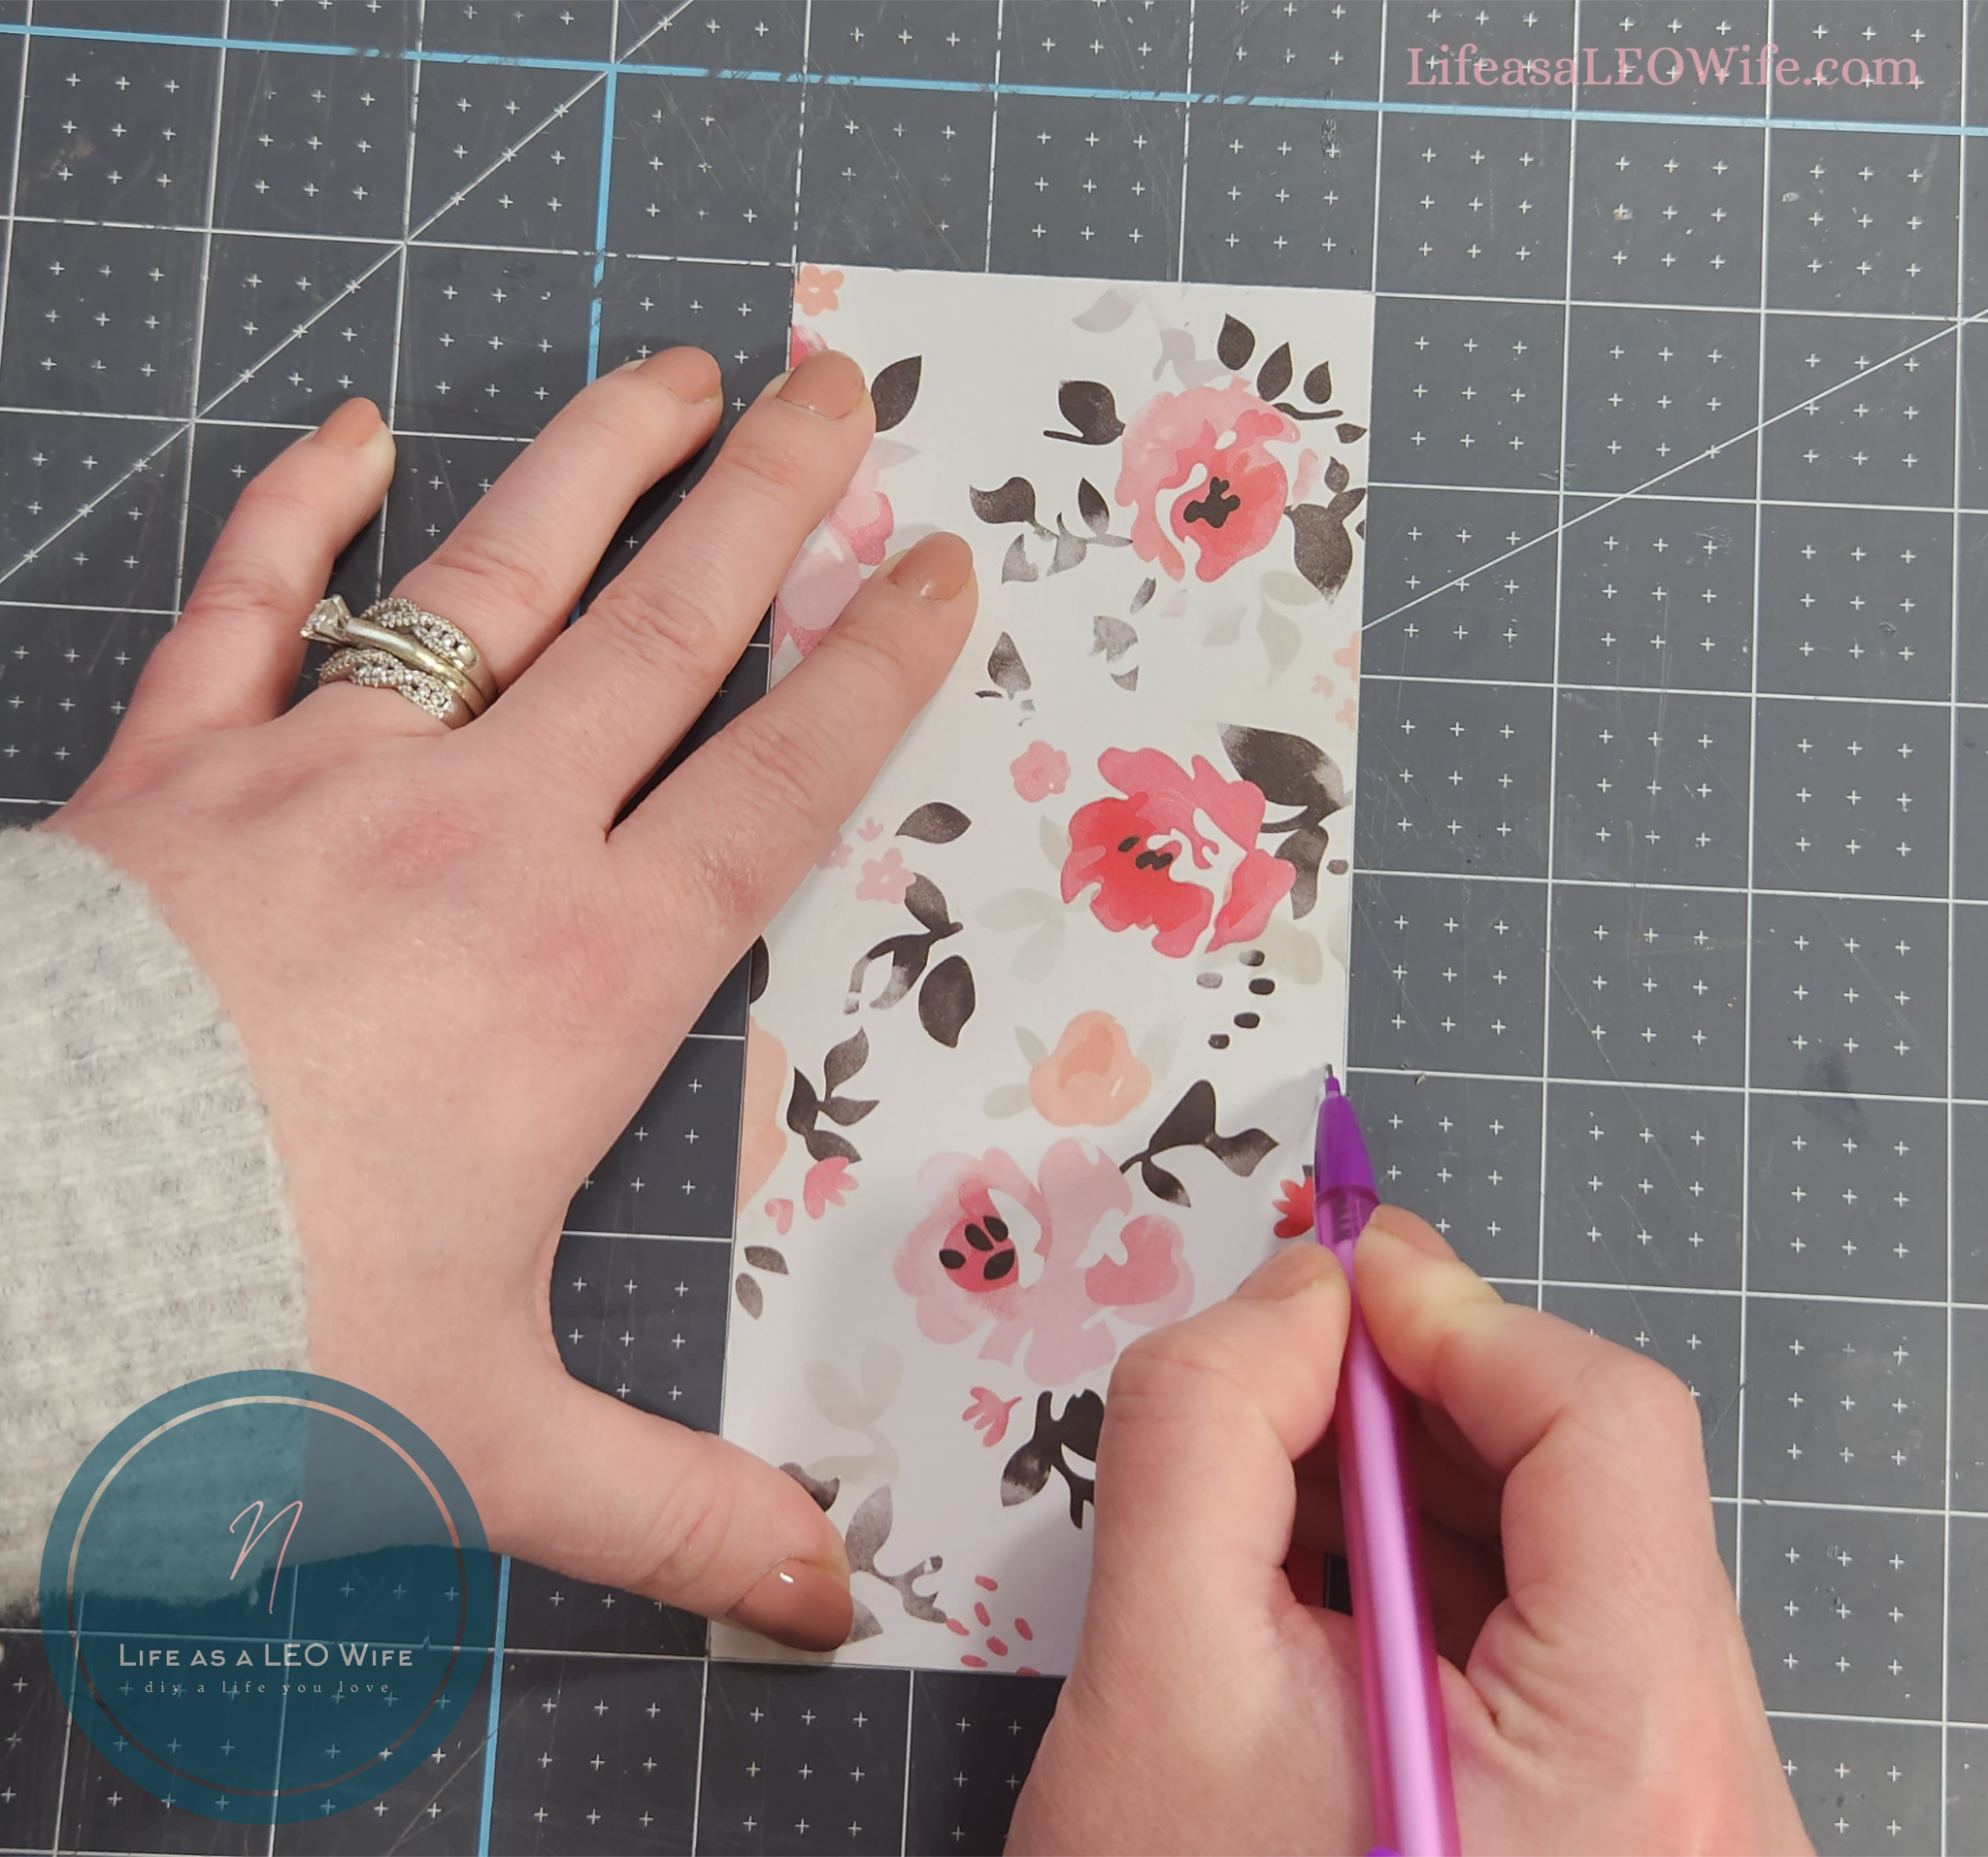 Marking 3" on the cut cardstock envelope for the Valentine's advent calendar.